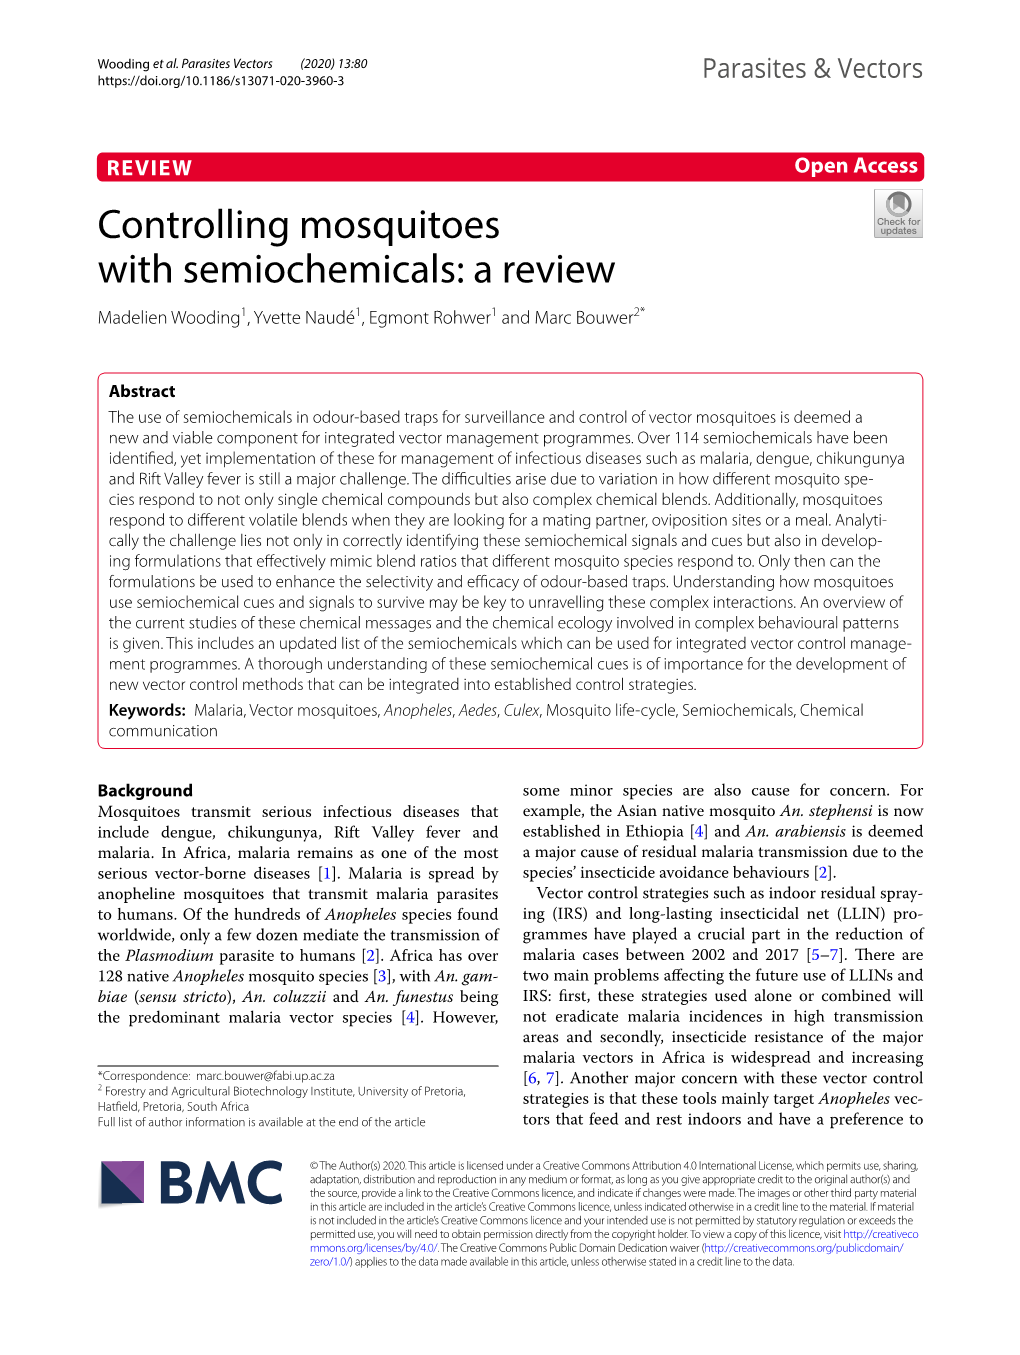 Controlling Mosquitoes with Semiochemicals: a Review Madelien Wooding1, Yvette Naudé1, Egmont Rohwer1 and Marc Bouwer2*